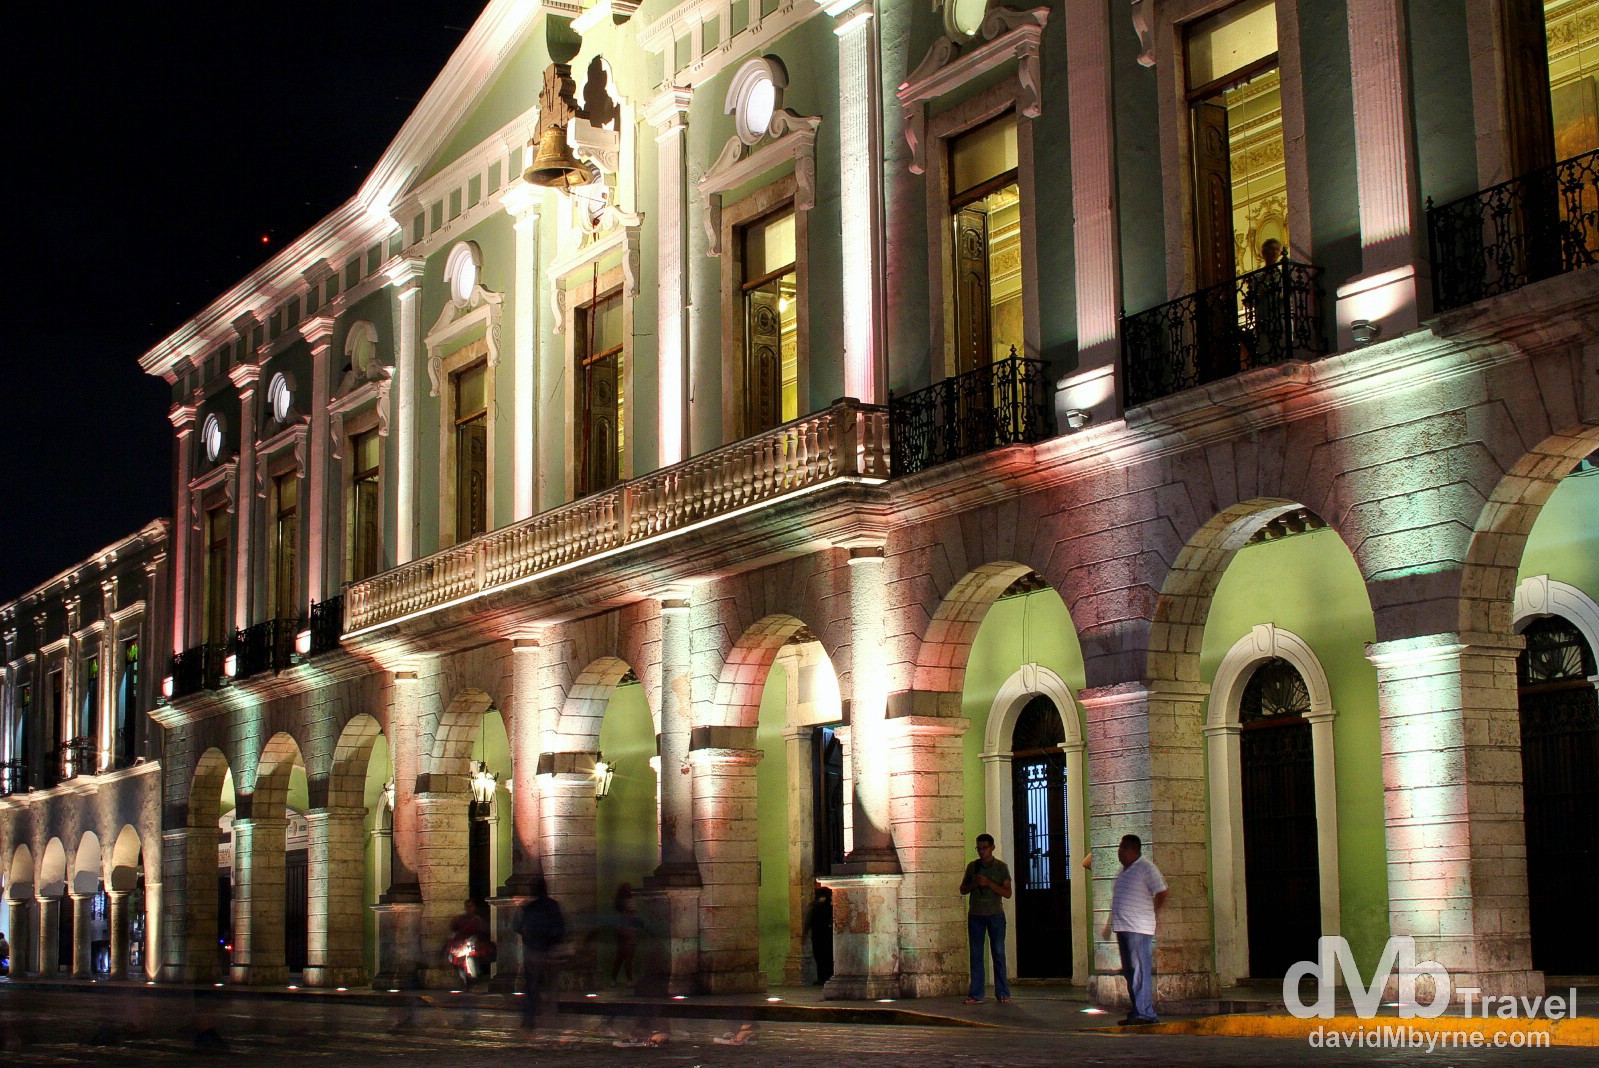 The Palacio de Gobierno on the north side of the plaza illuminated at night. It was built in 1892 on the site of the palace of the colonial governors but today houses the state of Yucatan’s executive government offices. Merida, Yucatan Peninsula, Mexico. May 1st 2013. 